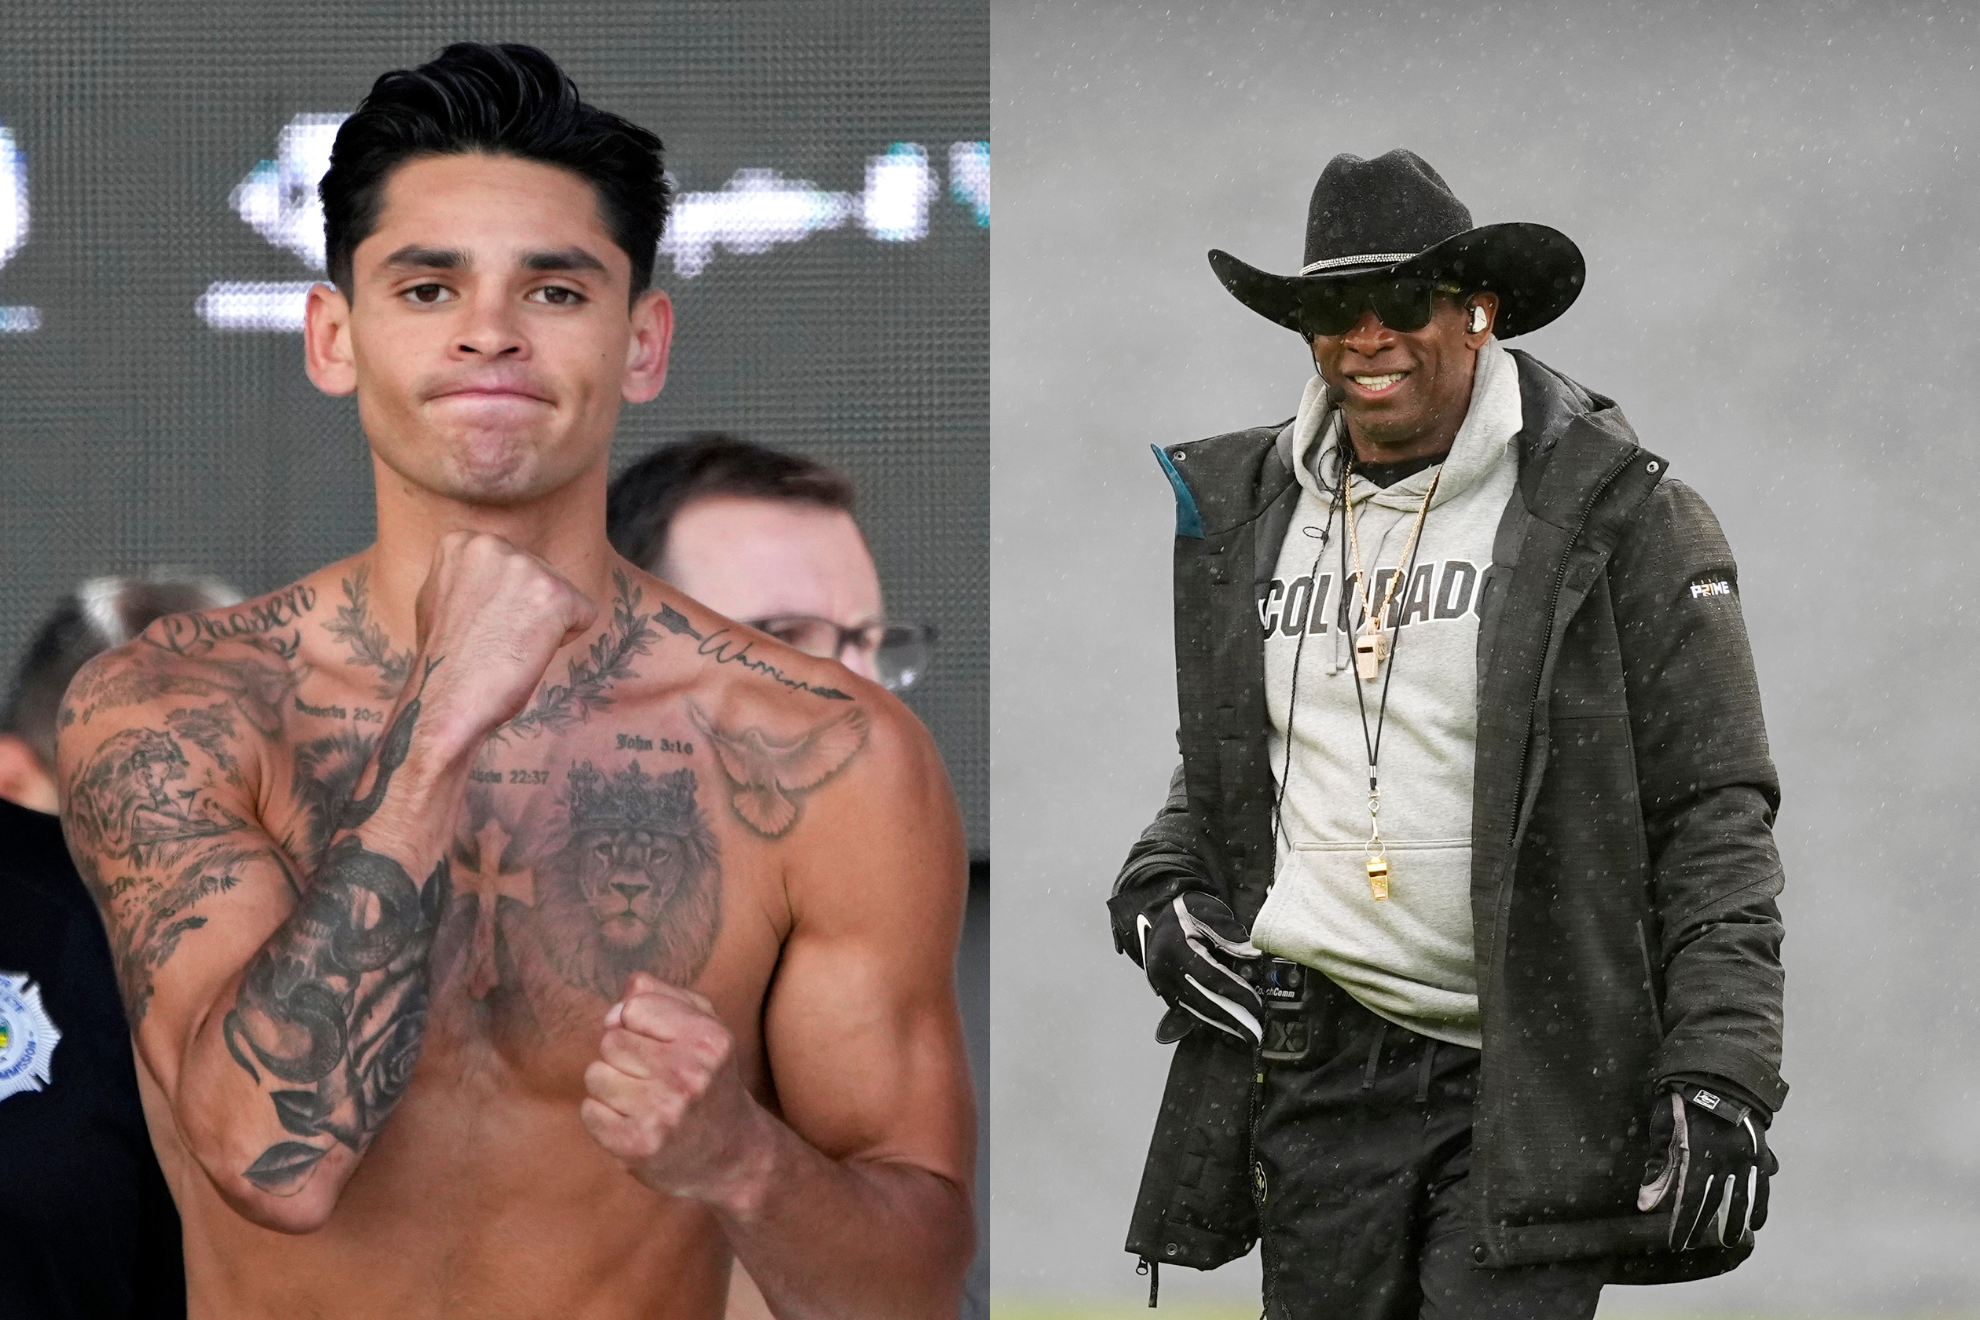 Ryan Garcia and Deion Sanders finally meet with a wholesome interaction in Colorado